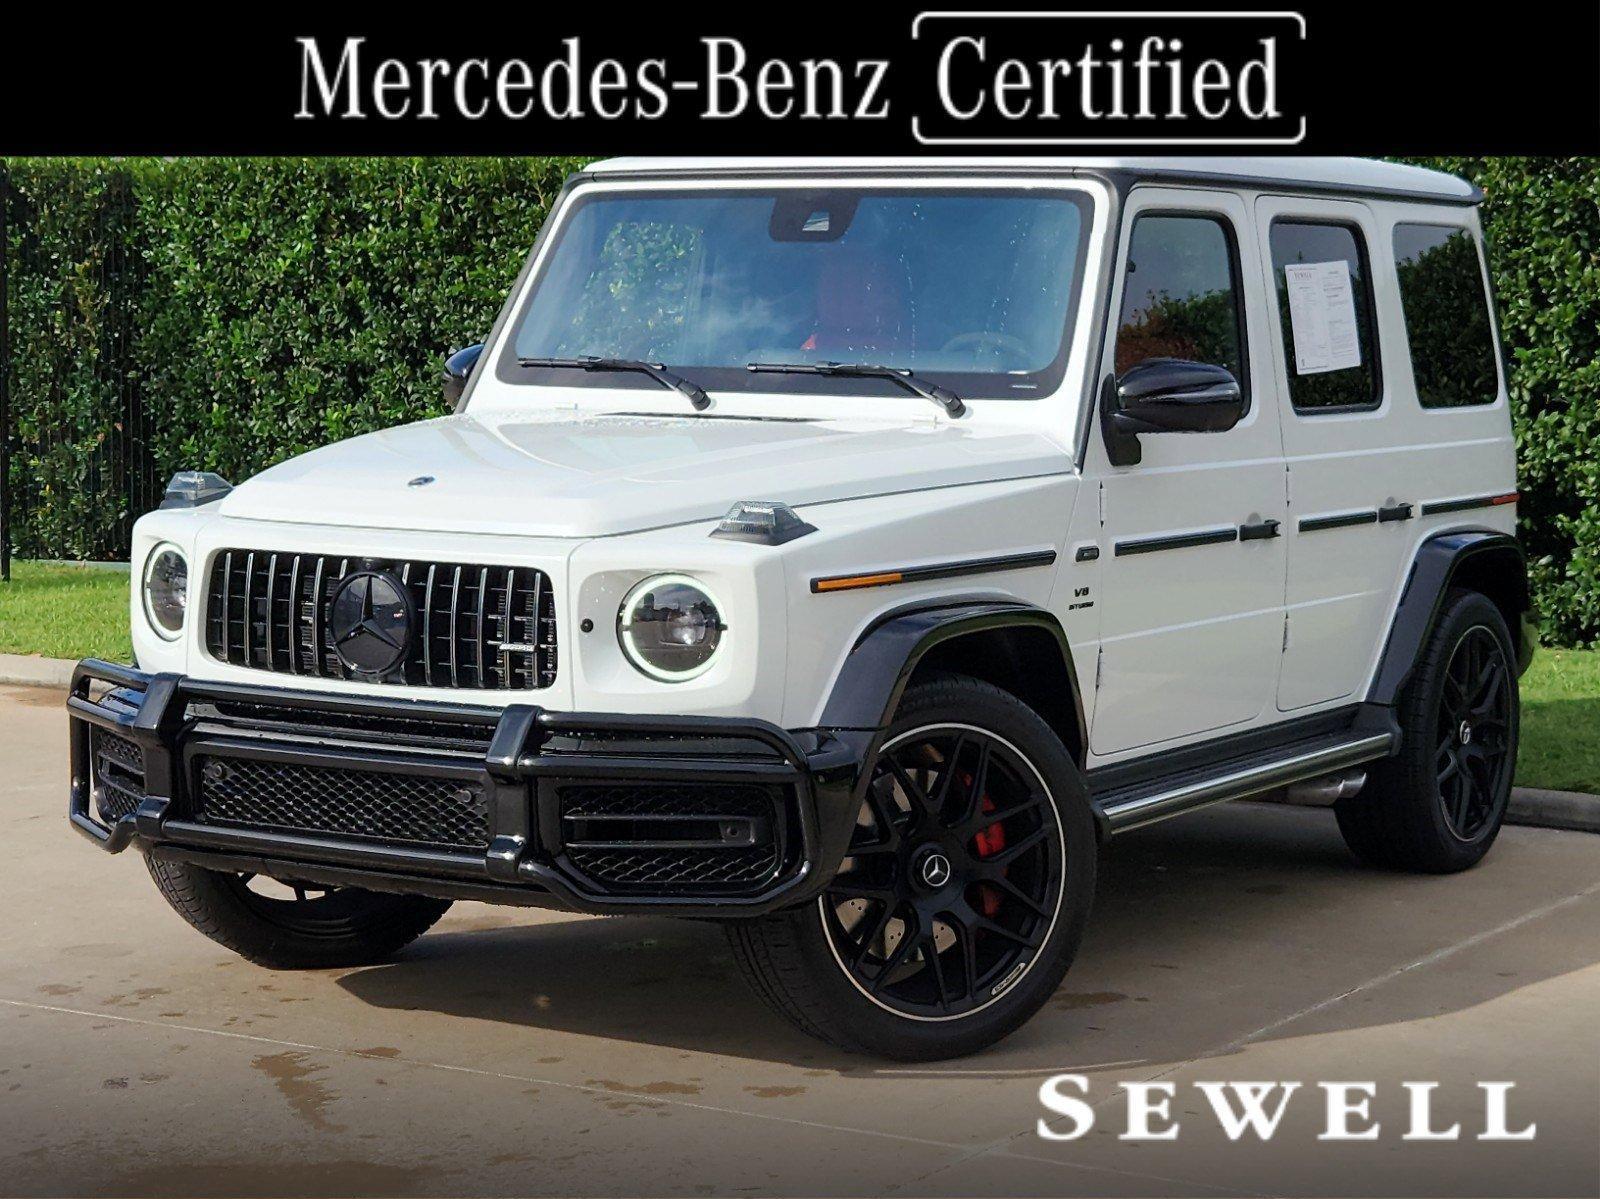 Certified White Mercedes Benz G Class Amg 4matic Suv For